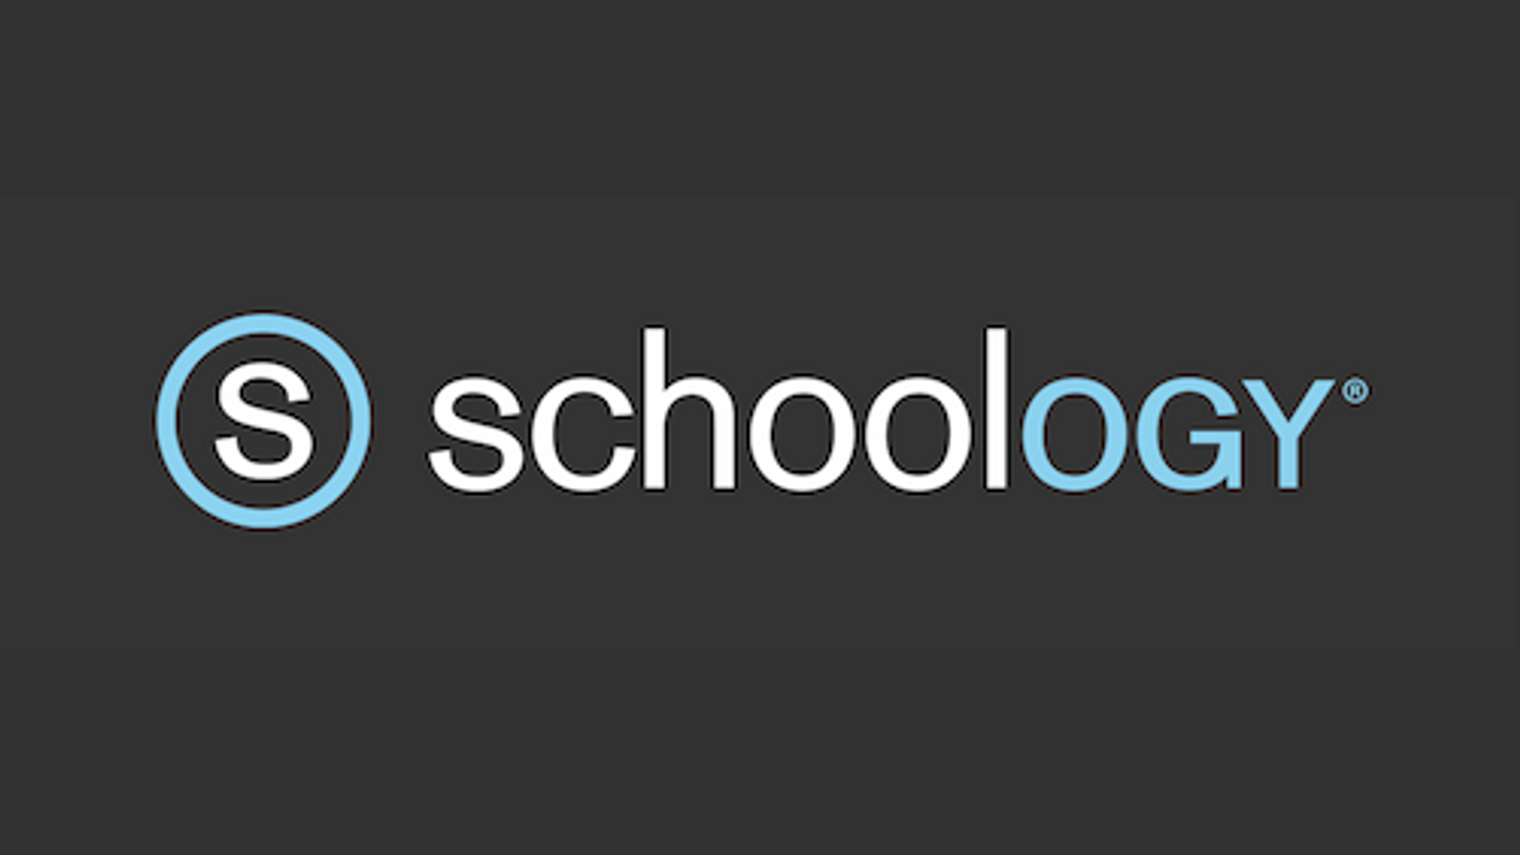 Schoology - An Introduction